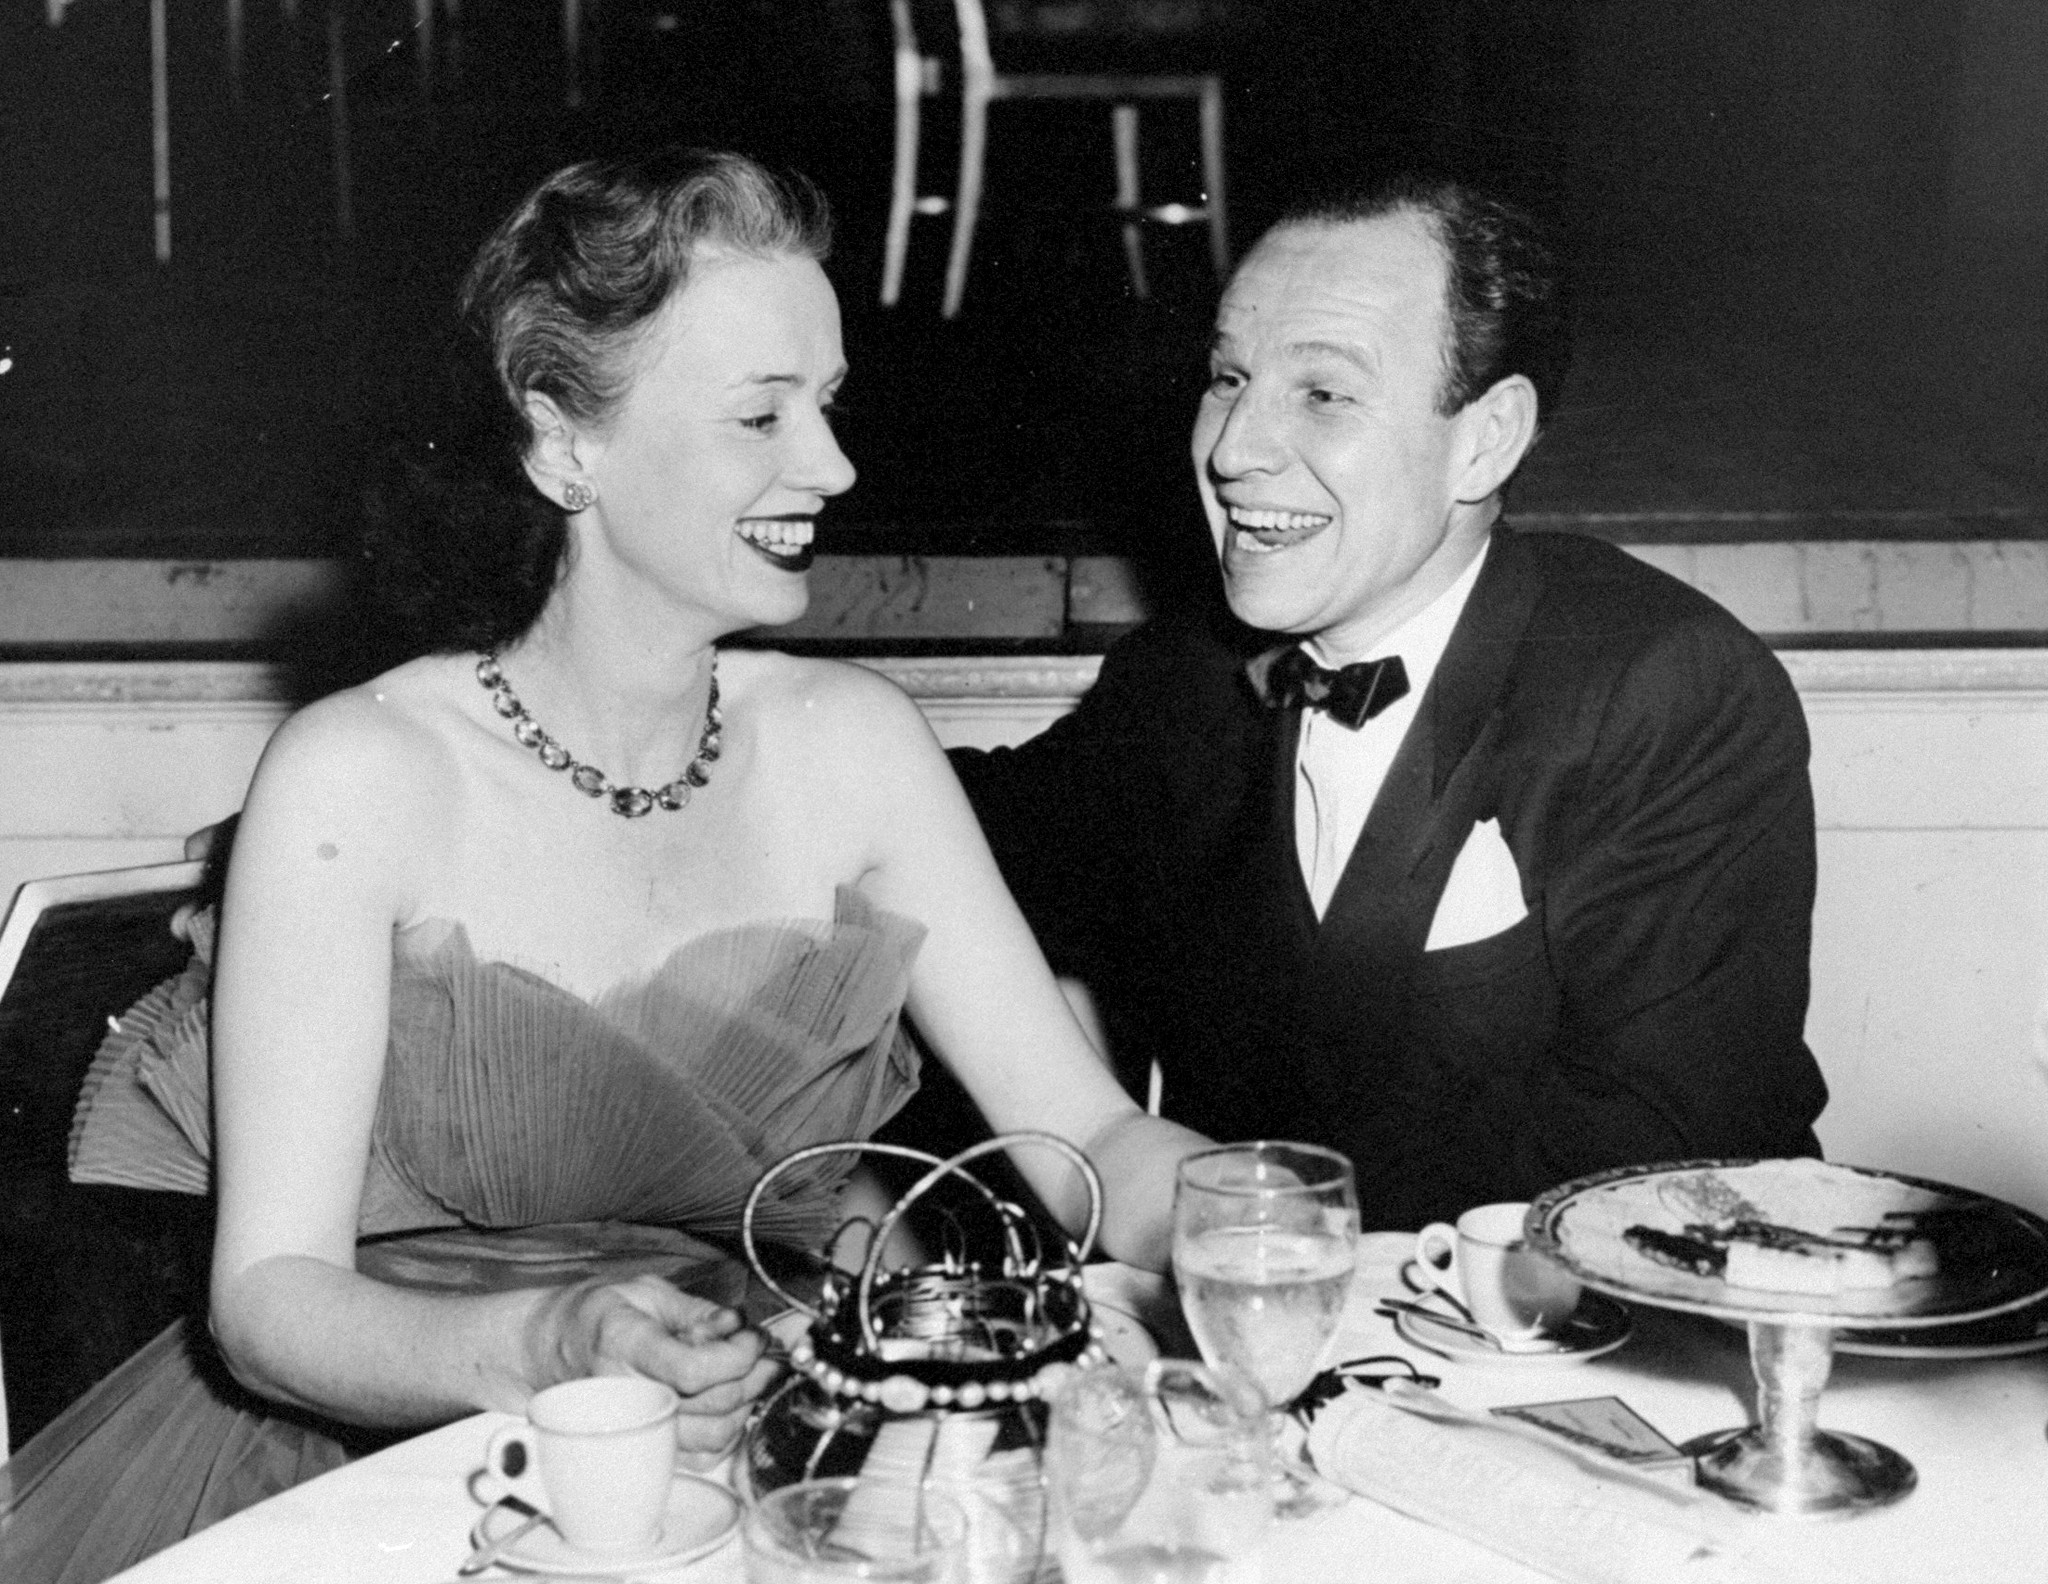 Jessica Tandy and her husband Hume Cronyn sitting at a table at the 6th Annual Tony Awards